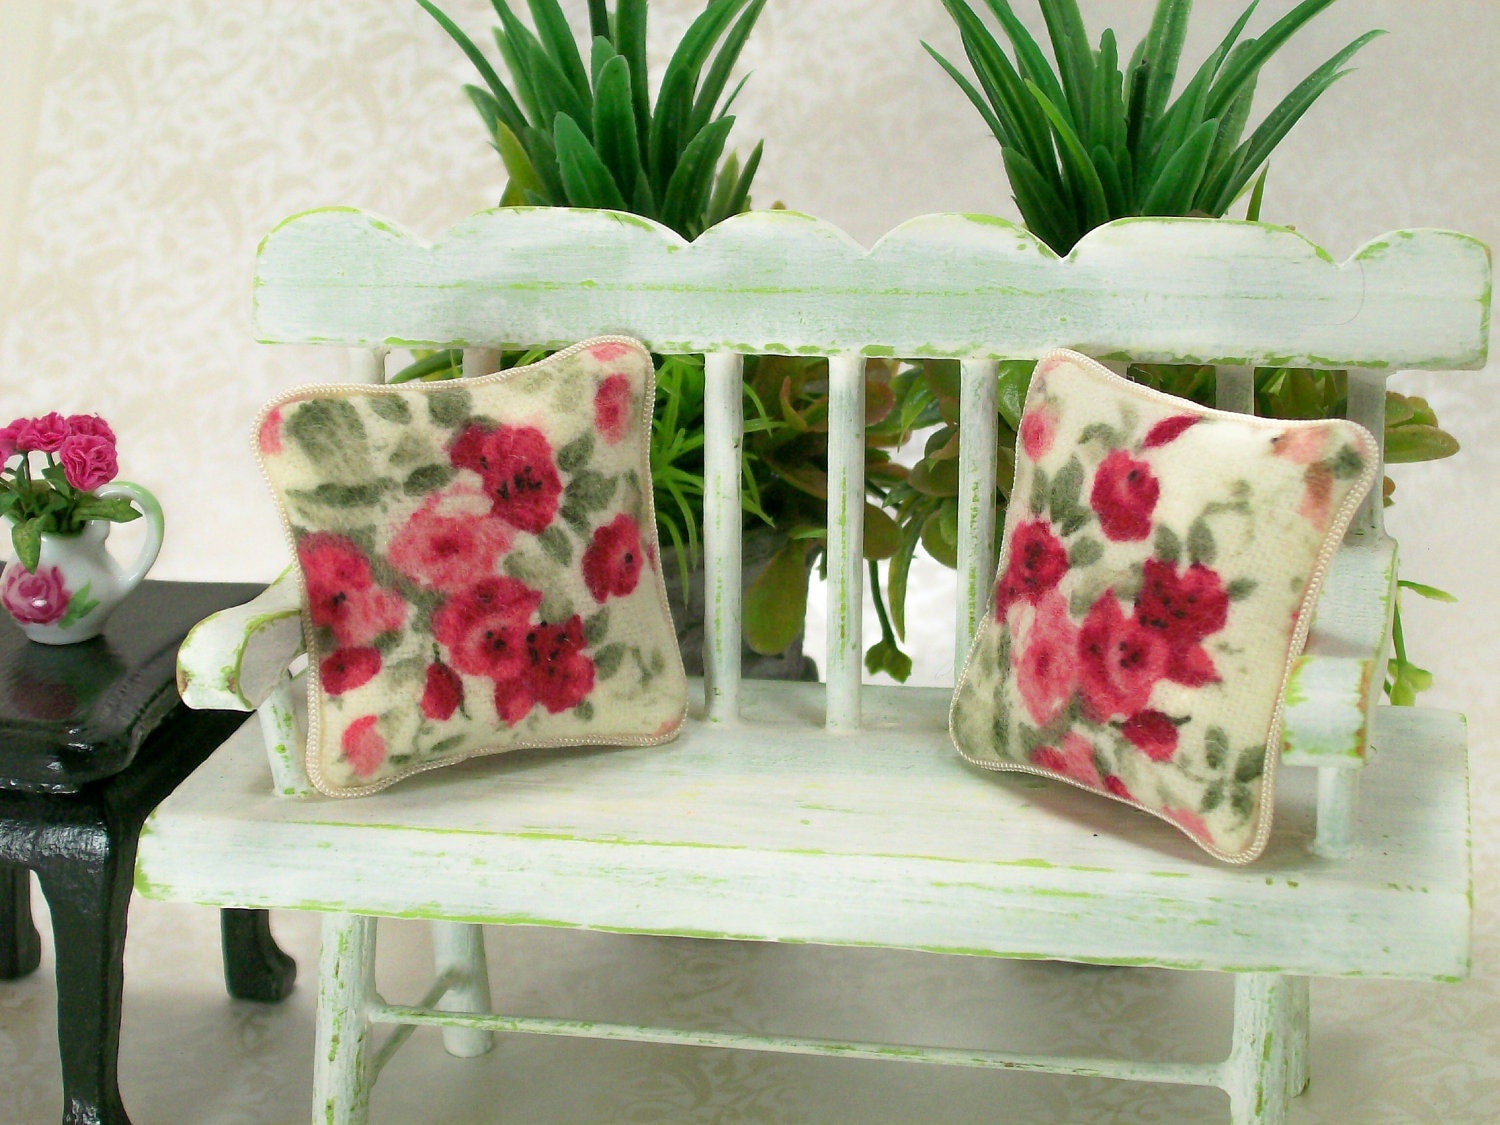 Dollhouse Miniature Pillows Cabbage Roses Pink Red Rose Victorian Shabby Chic Floral Flowers Throw Toss Cushions One Inch Scale - dalesdreams